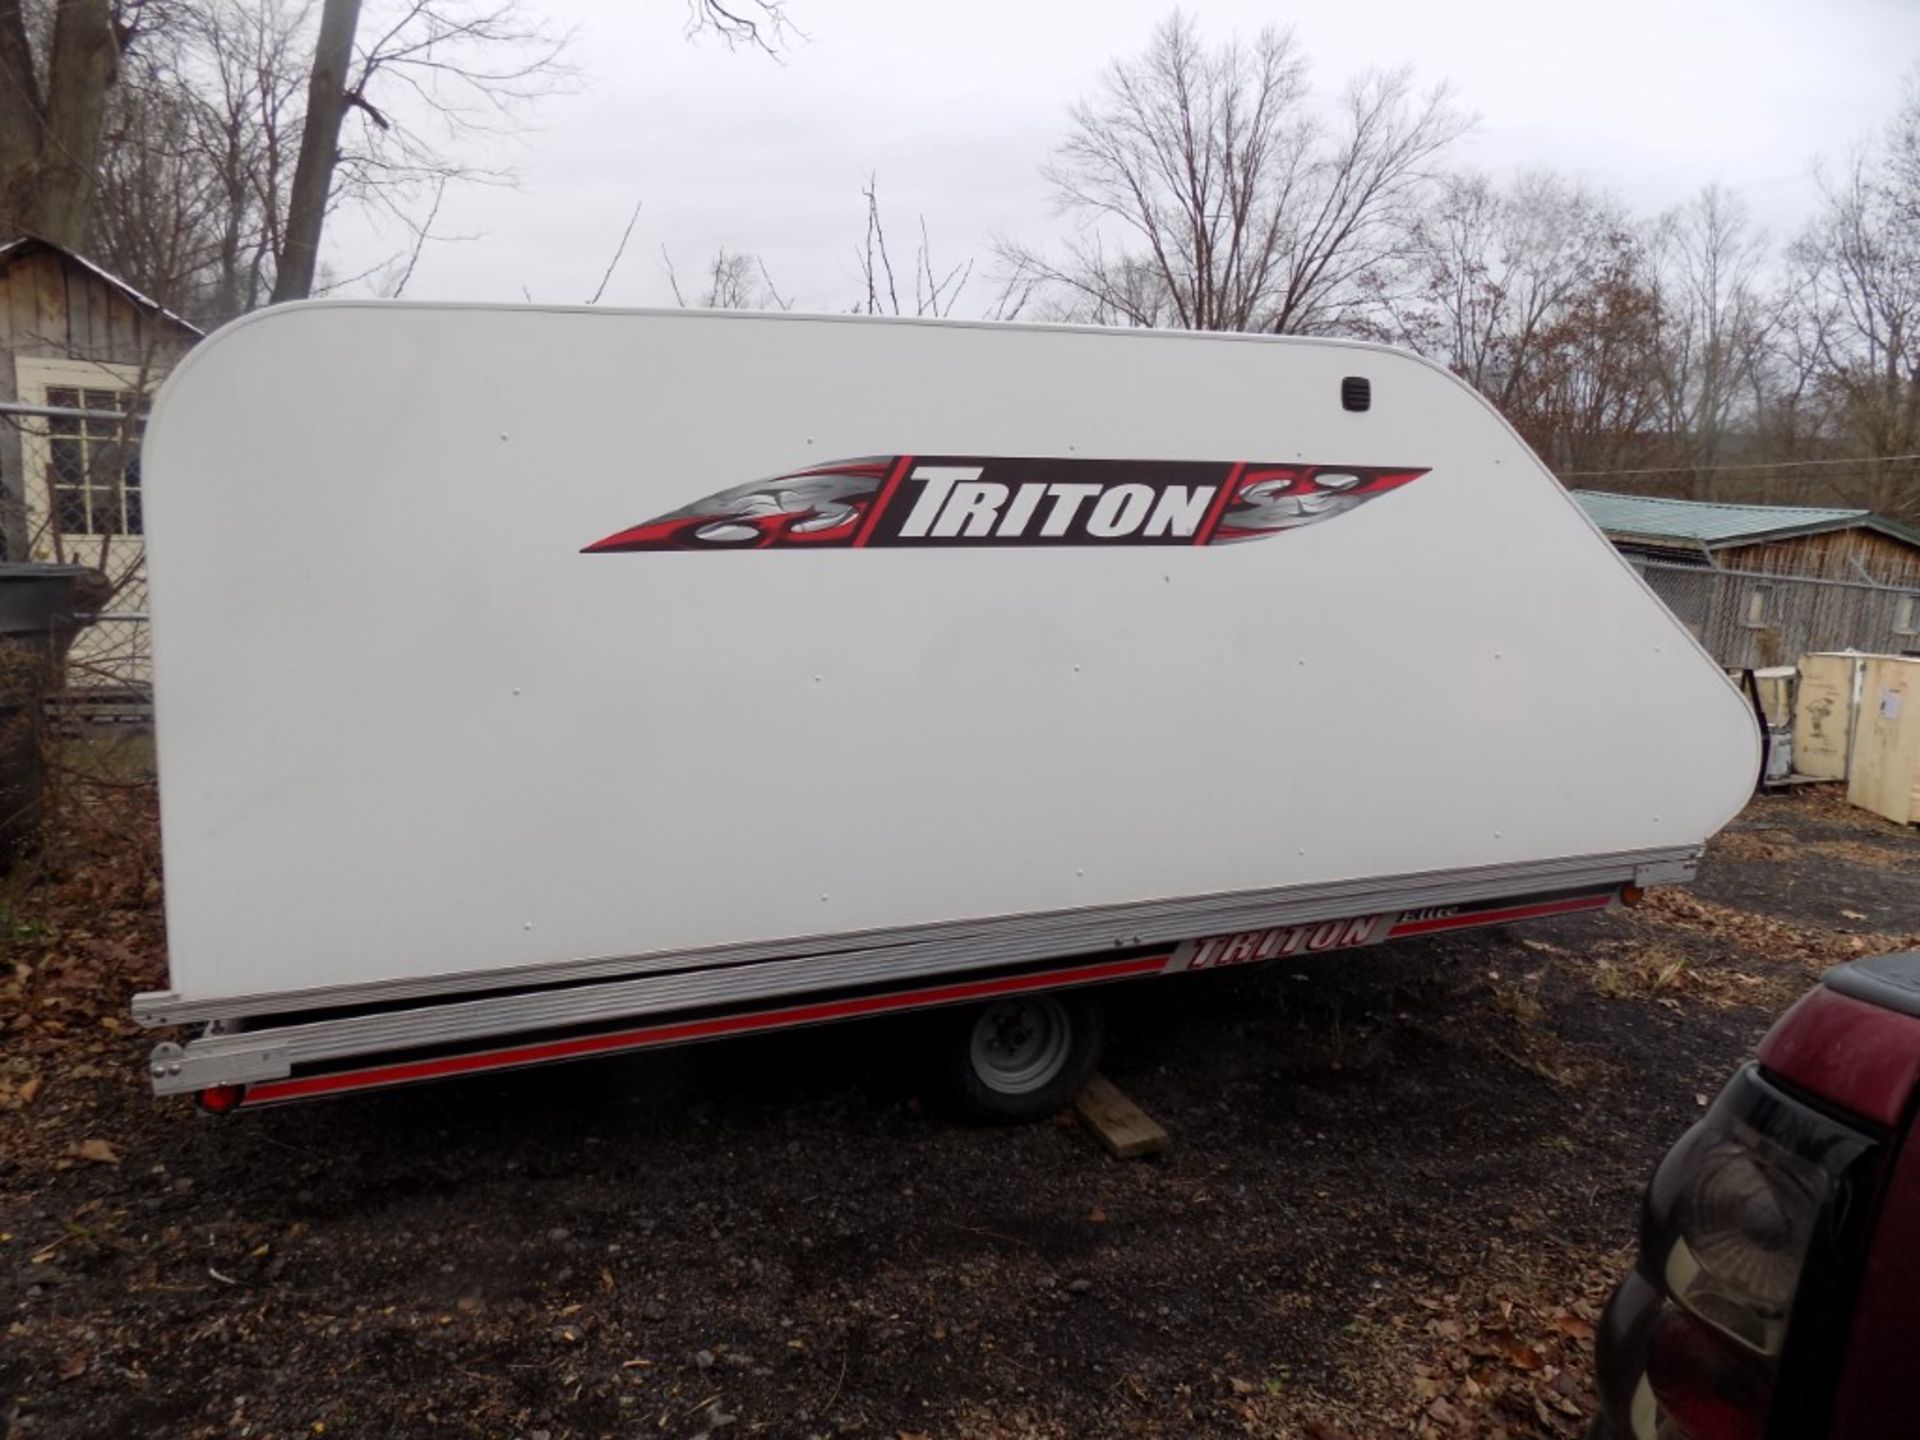 2015 Triton 2-Sled Snowmobile Trailer, GVW 2200lbs, White, Vin# 4TCSS1123FHW11016 - Trailer is in